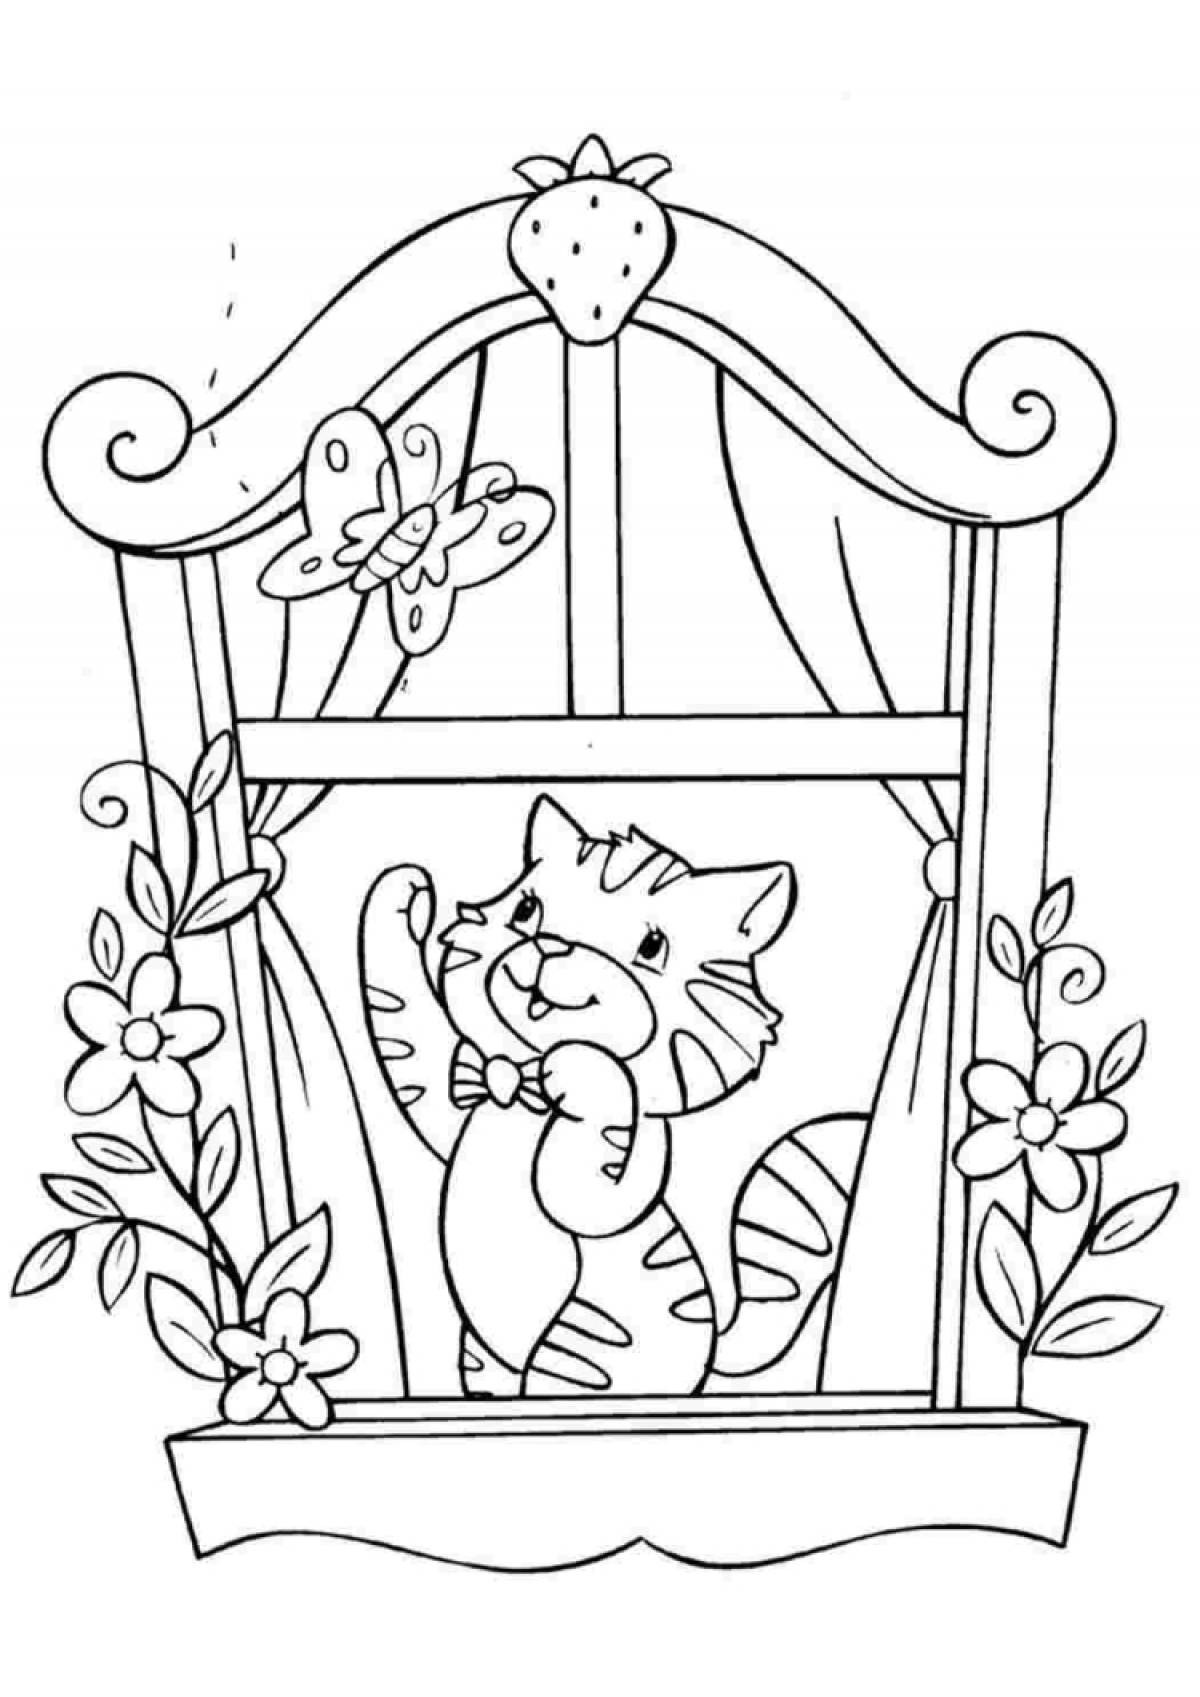 Playtime cat house coloring page for pre-k